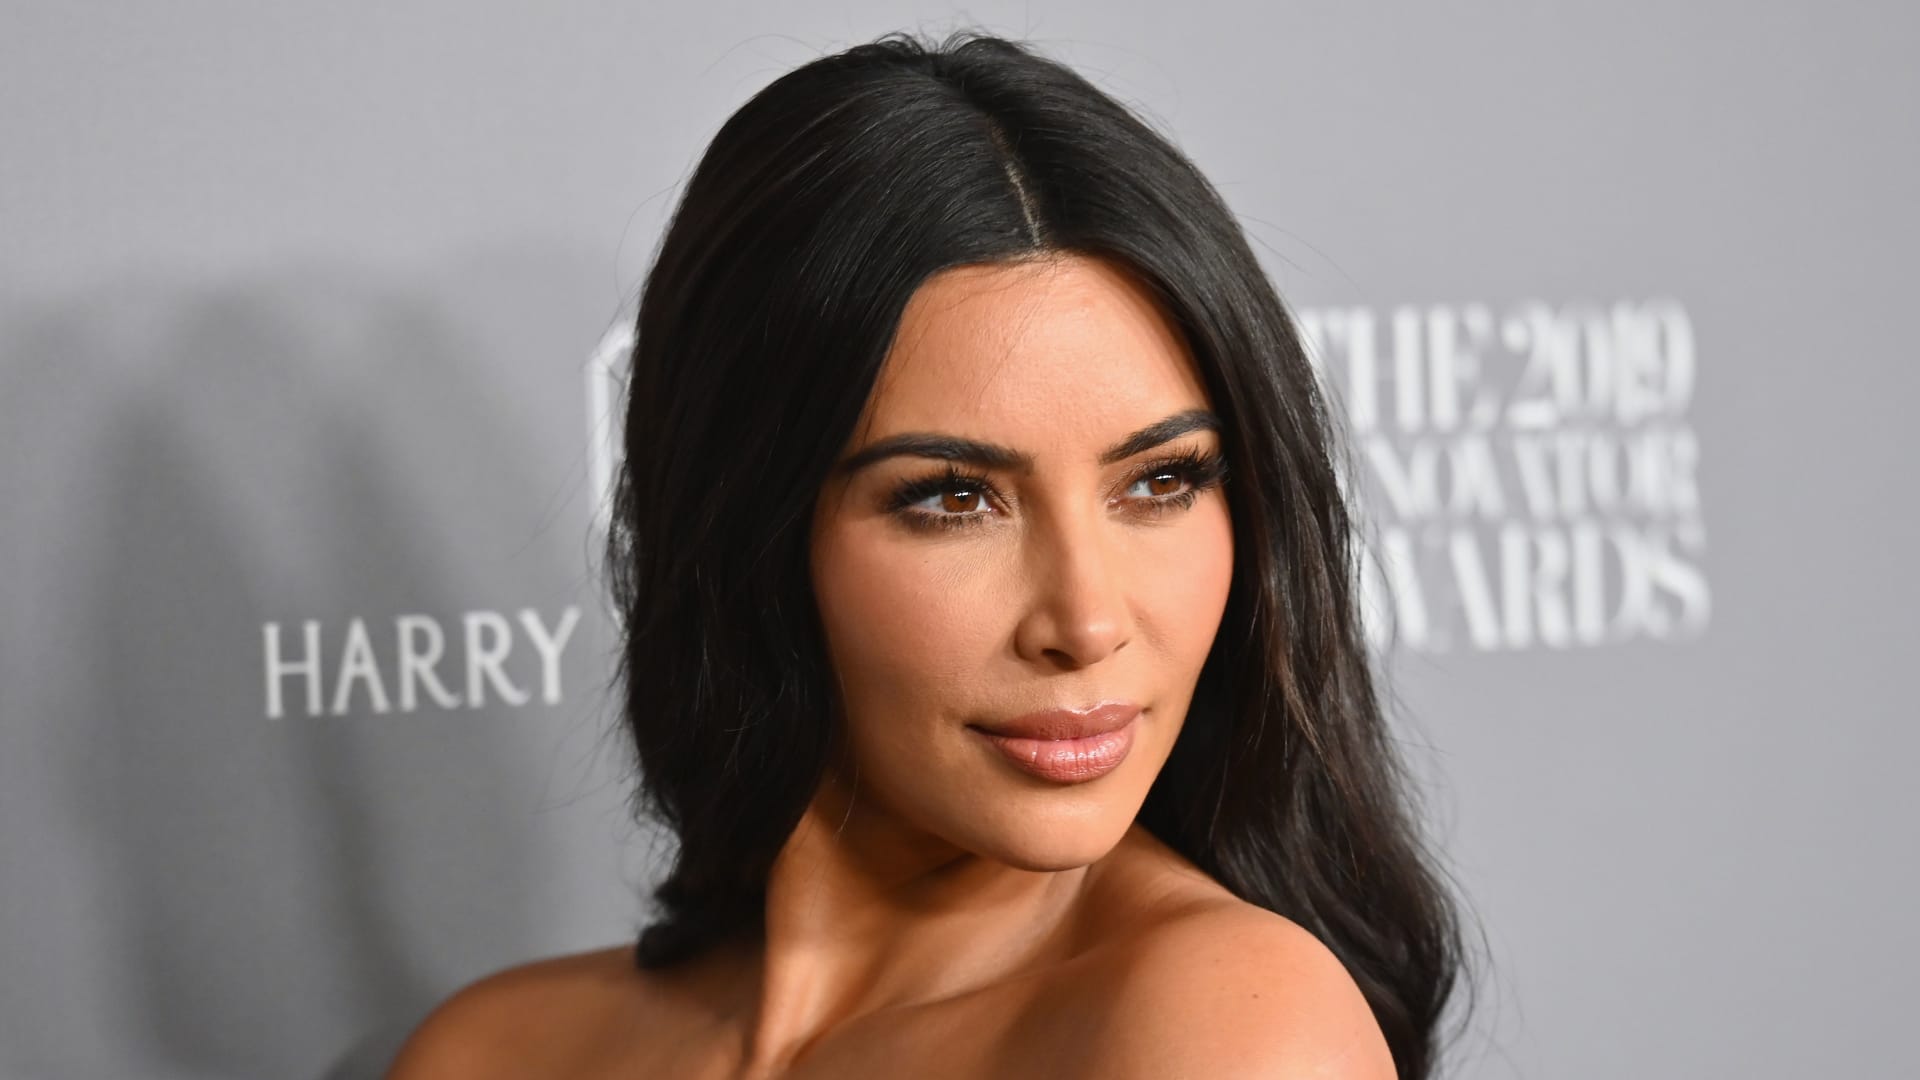 Why you should be wary of investing advice from celebrities like Kim Kardashian